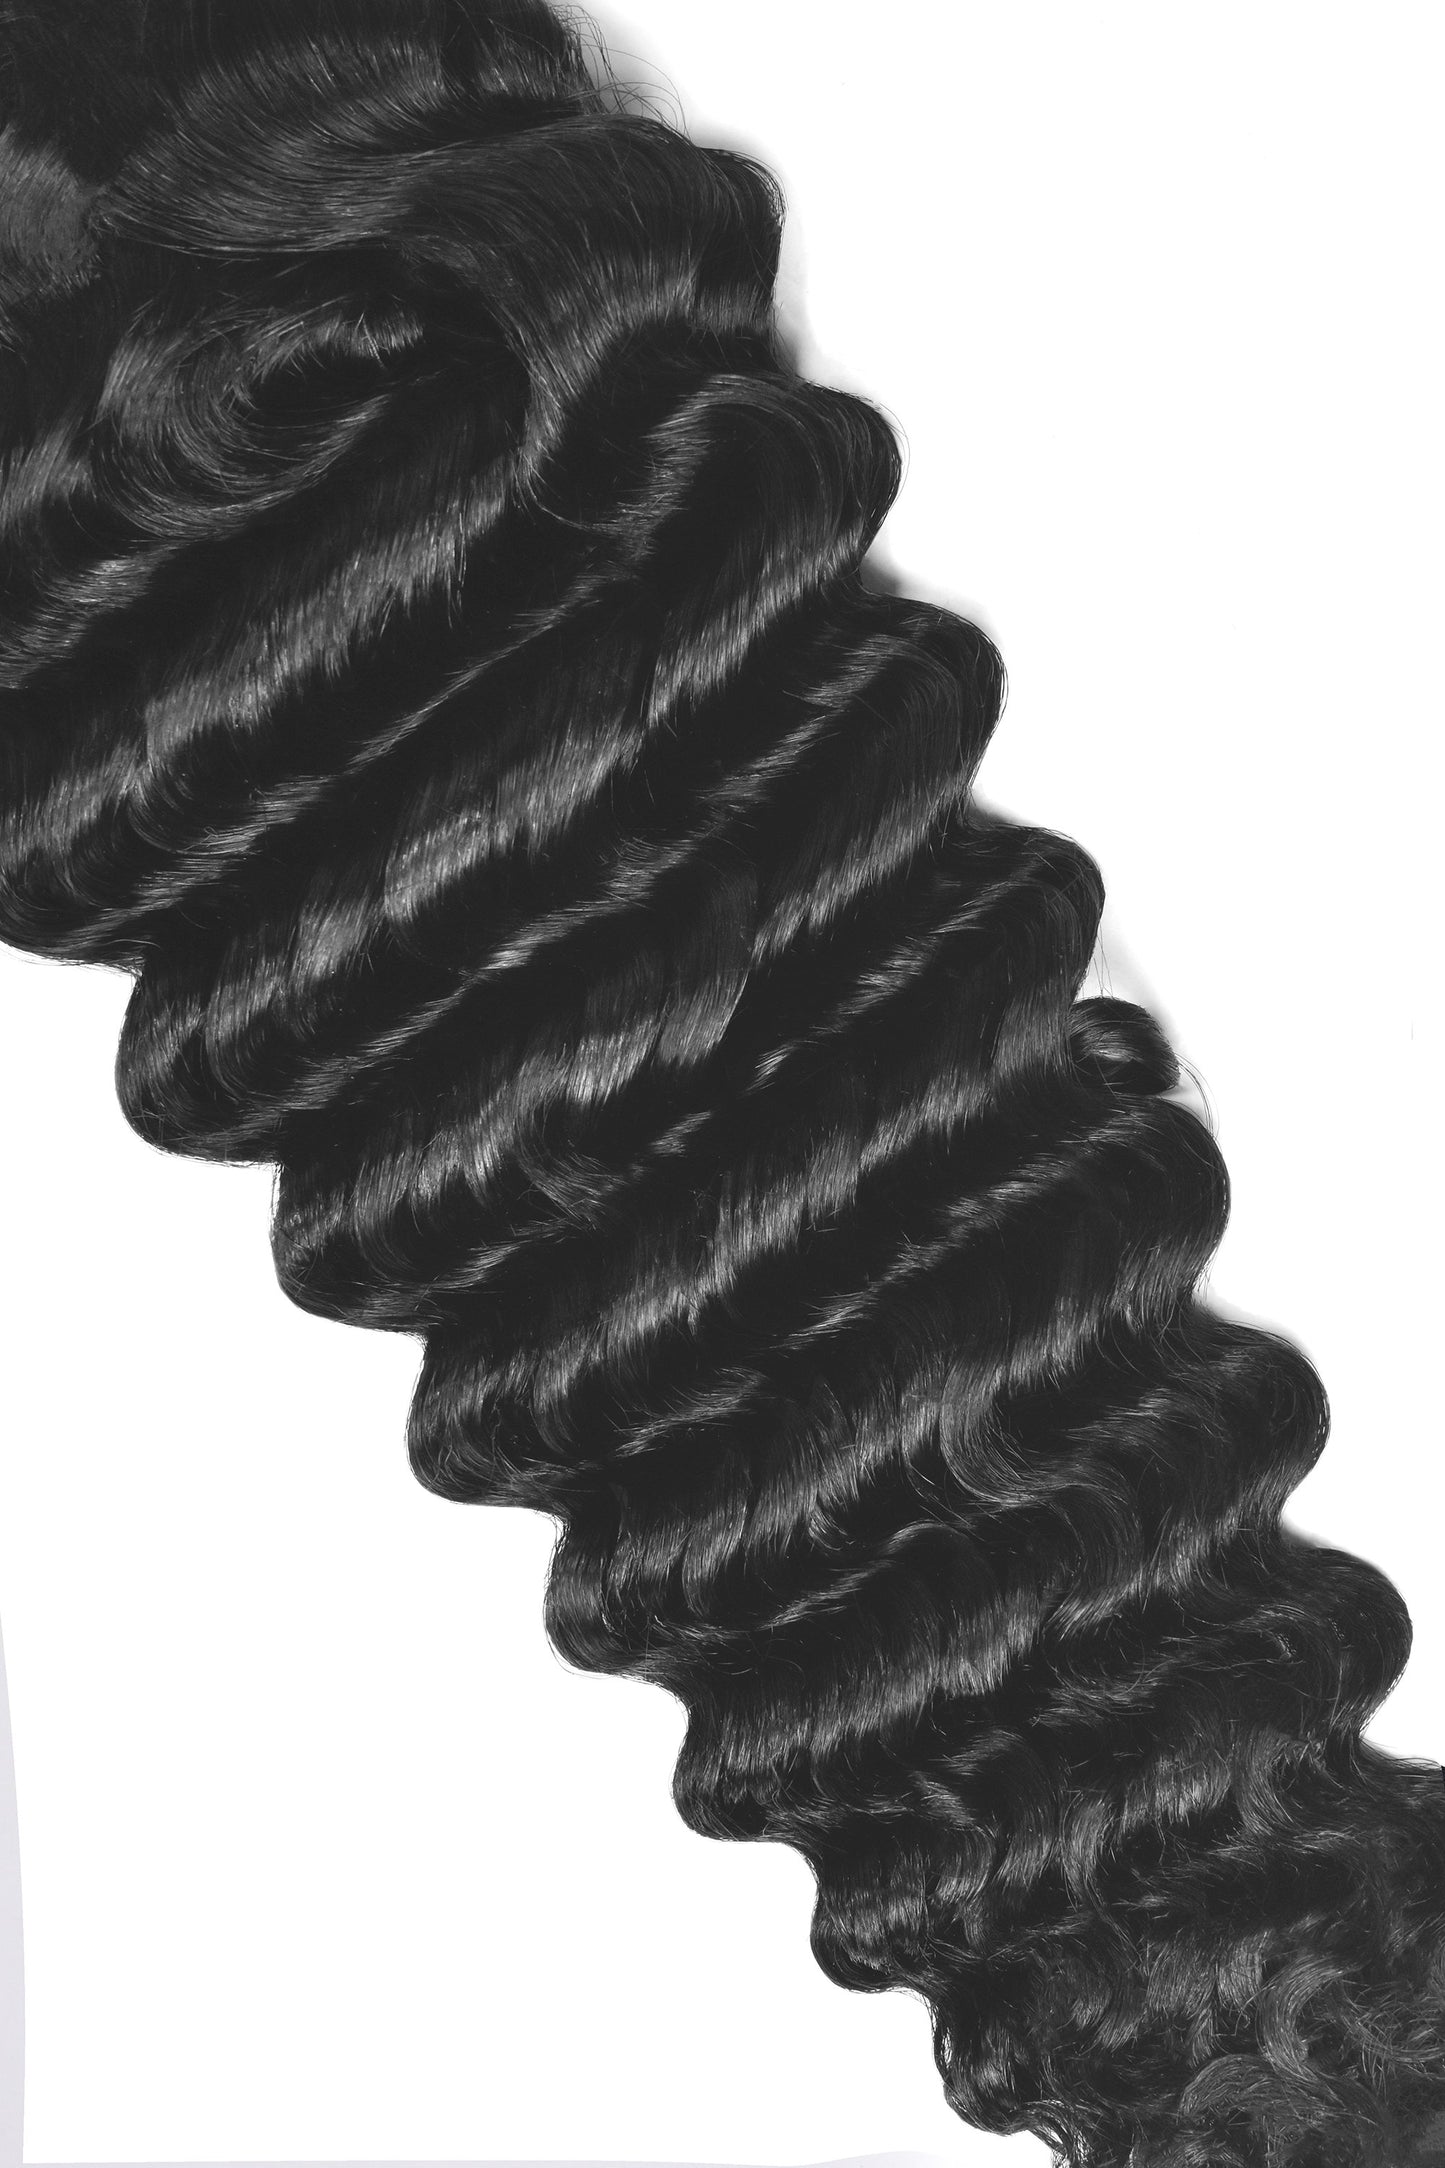 Curly Full Head Remy Clip in Human Hair Extensions - Jet Black (#1) Curly Clip In Hair Extensions cliphair 